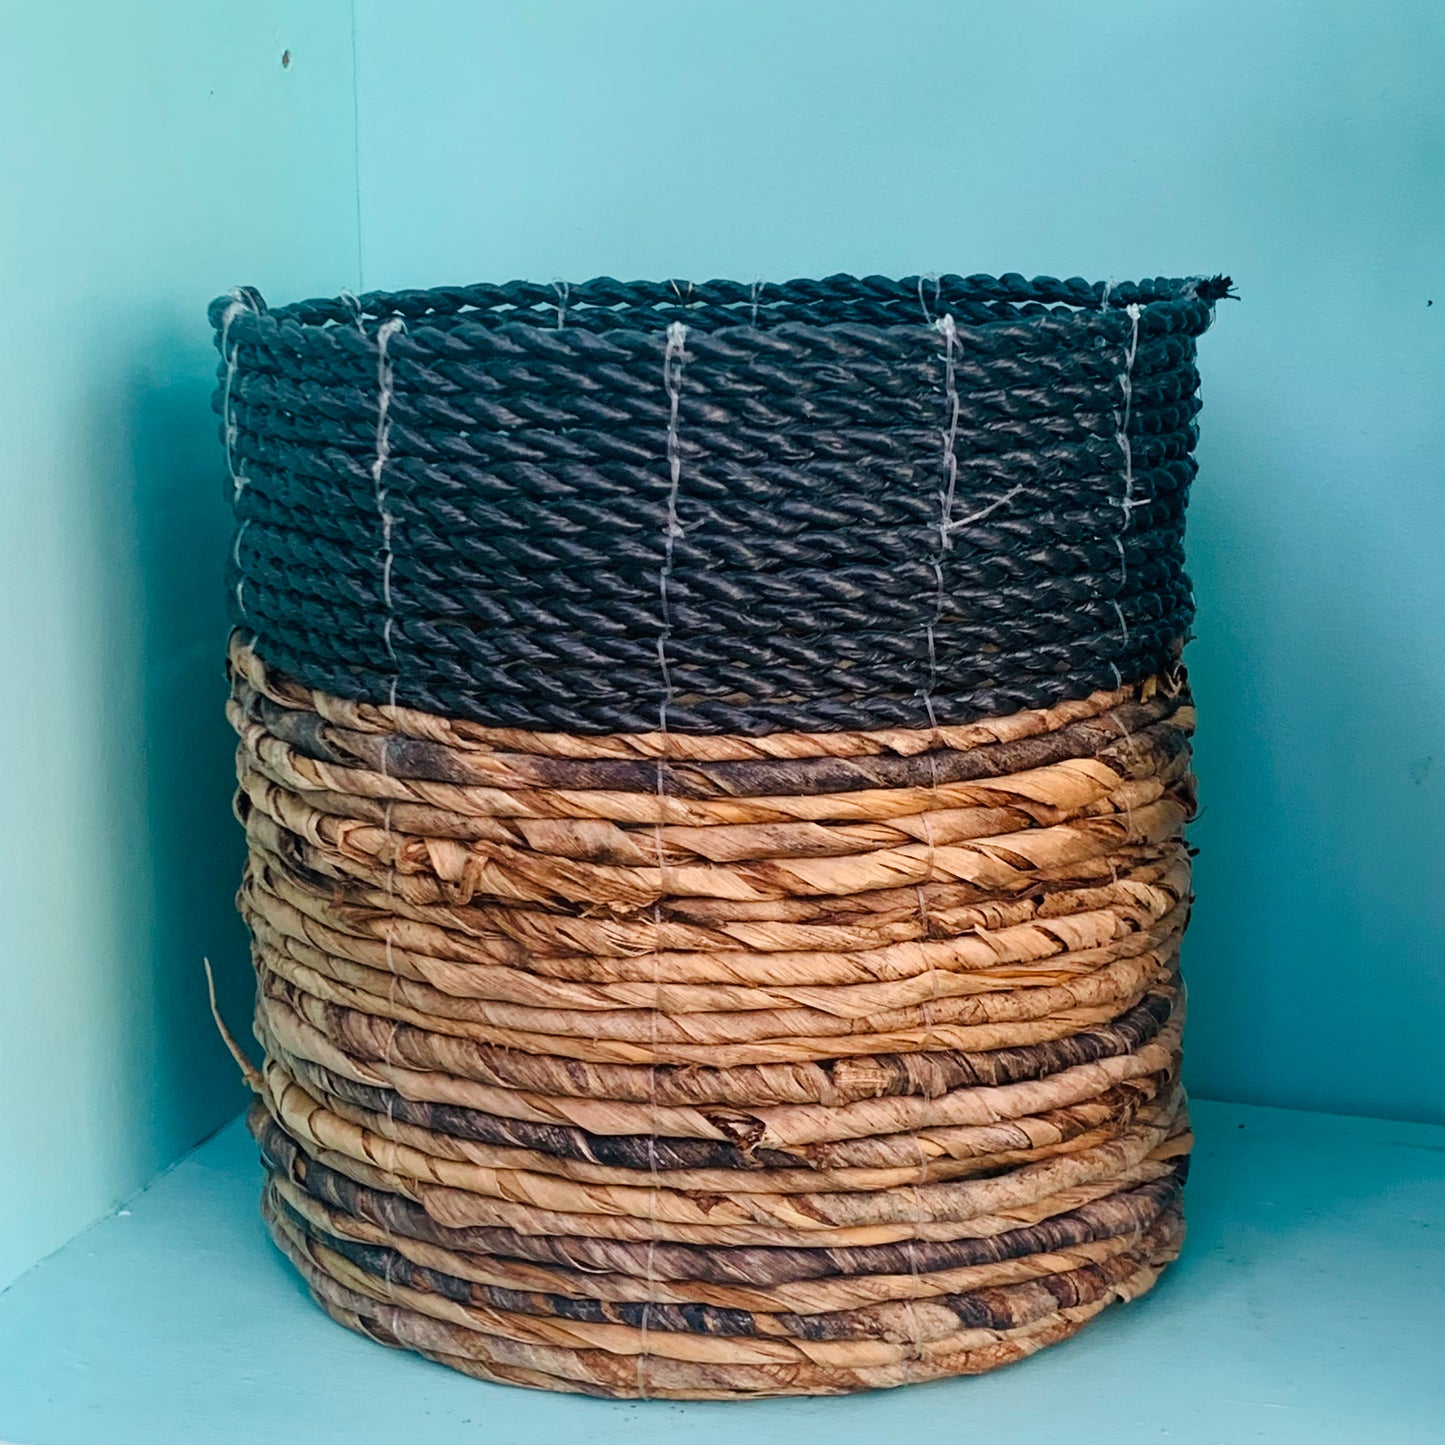 Basket straw colors